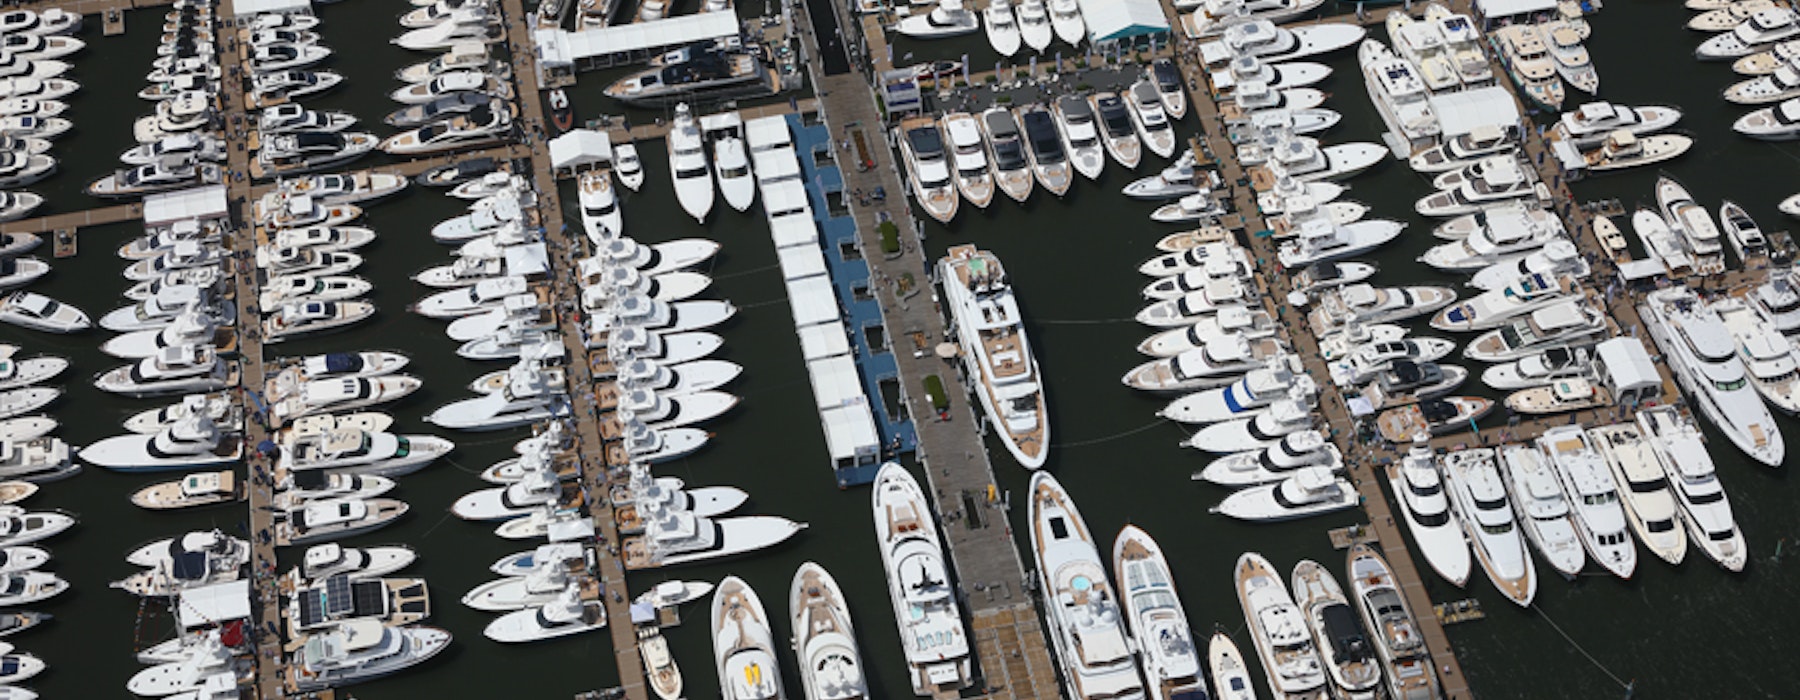 New Dates For Palm Beach International Boat Show